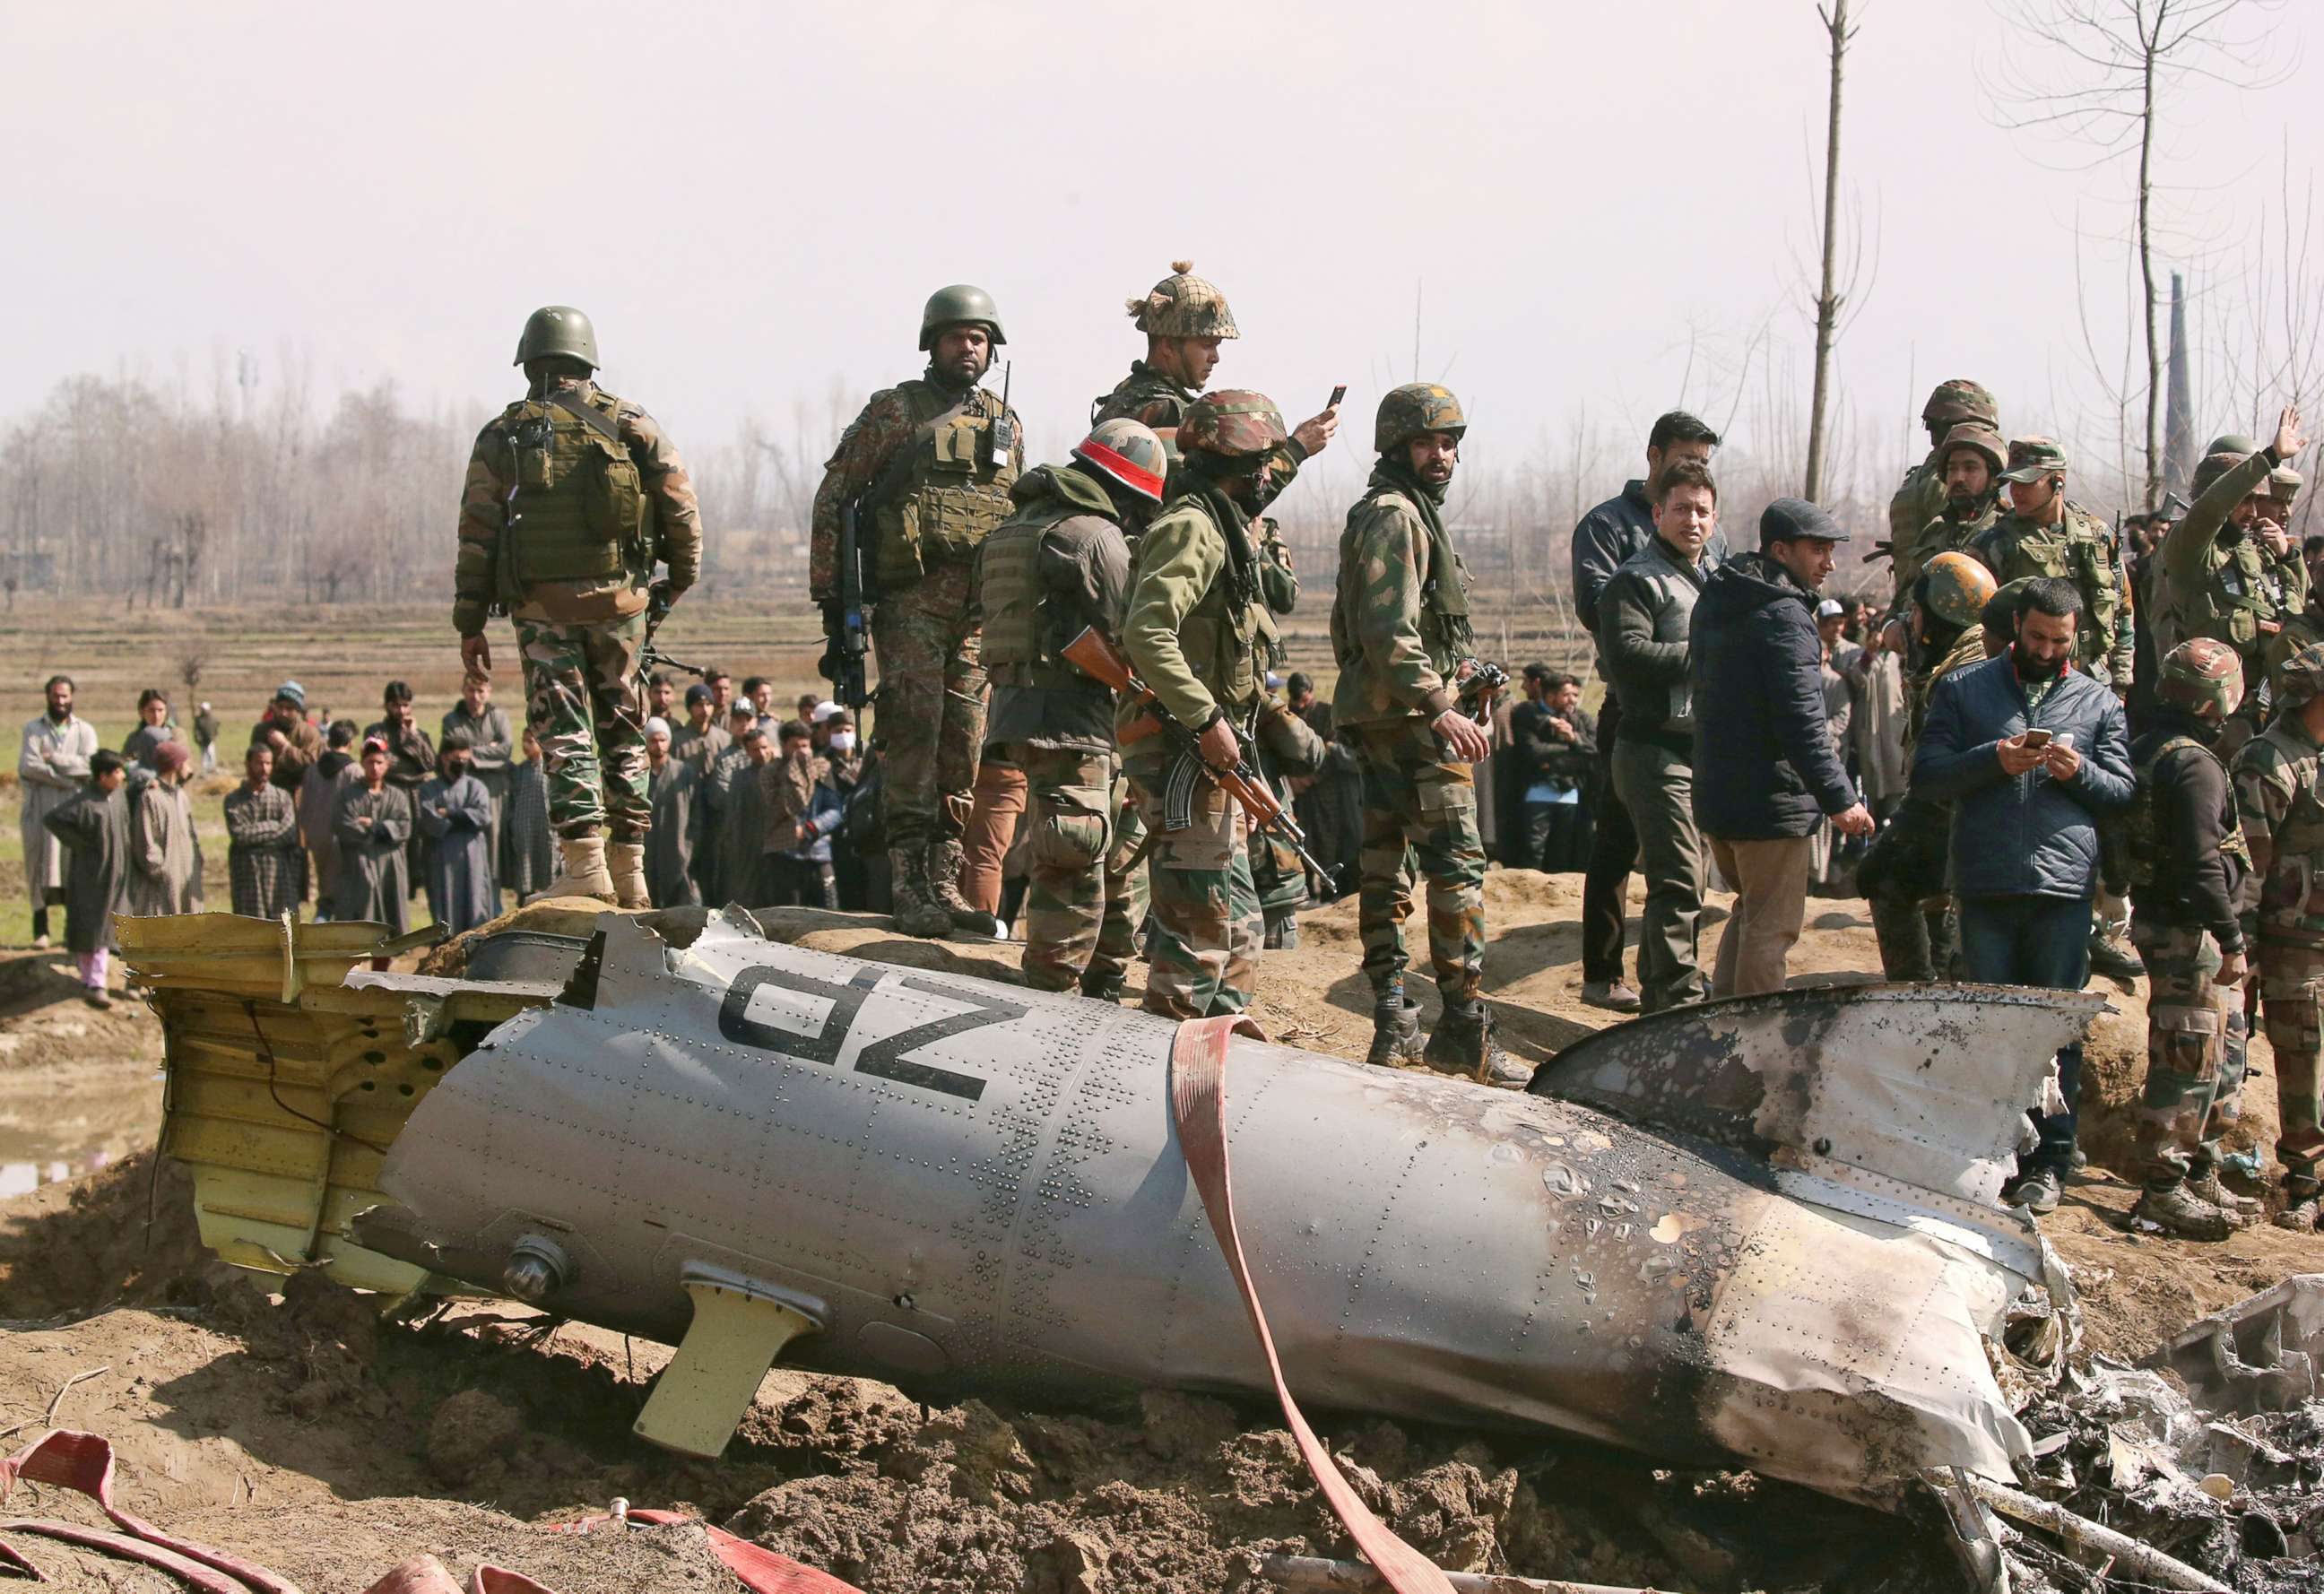 PHOTO: Indian soldiers stand next to the wreckage of an Indian Air Force helicopter after it crashed in Budgam district in Kashmir Feb. 27, 2019.